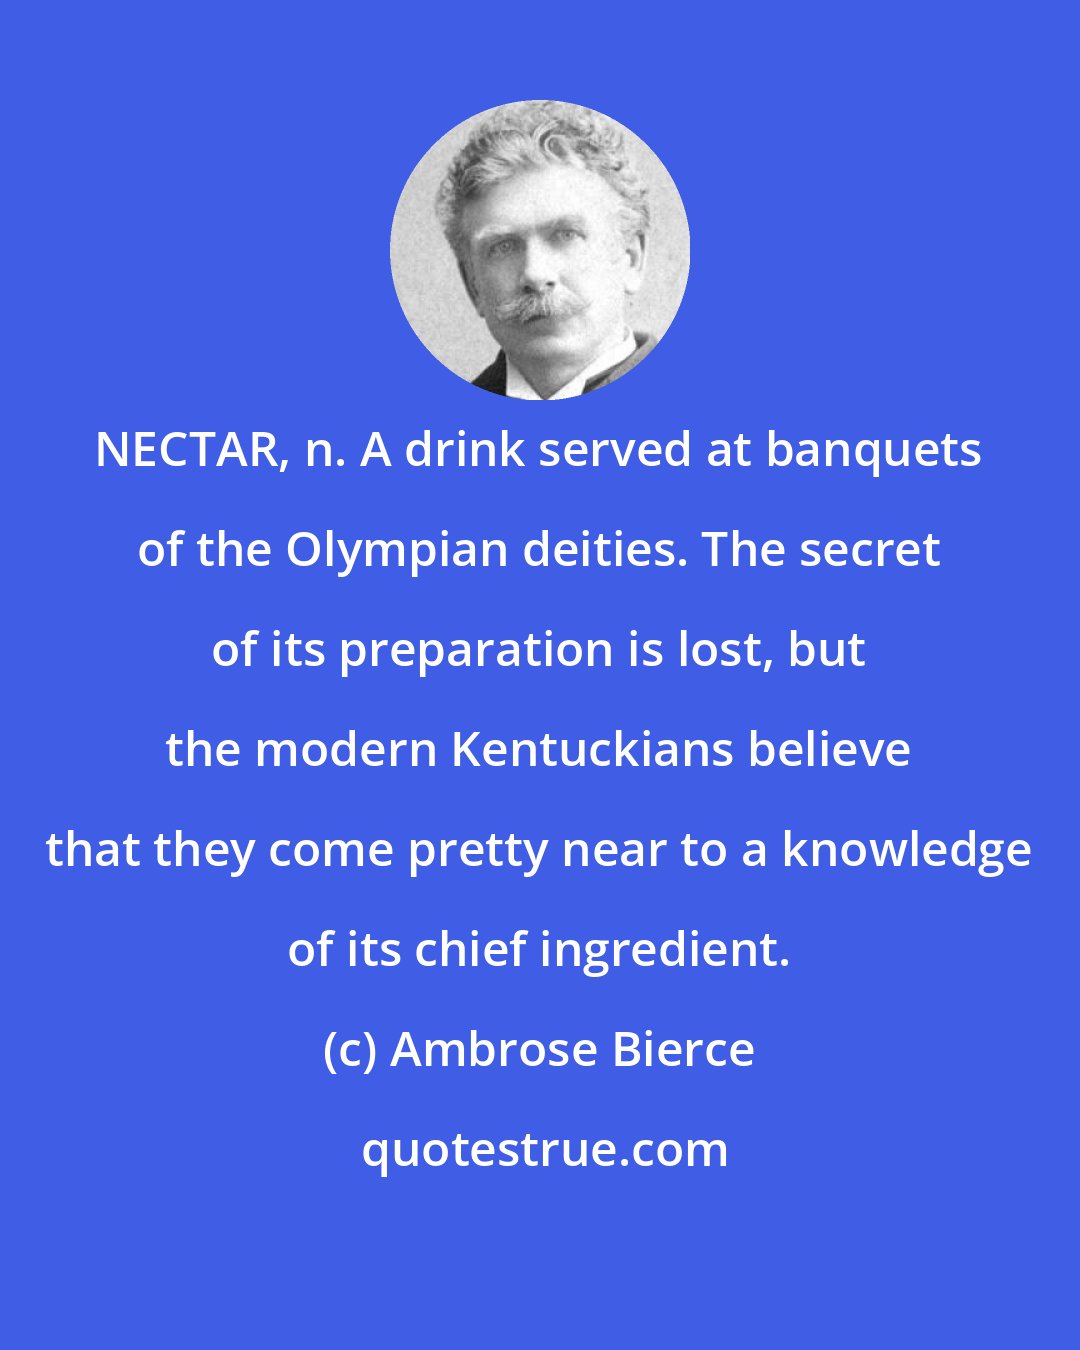 Ambrose Bierce: NECTAR, n. A drink served at banquets of the Olympian deities. The secret of its preparation is lost, but the modern Kentuckians believe that they come pretty near to a knowledge of its chief ingredient.